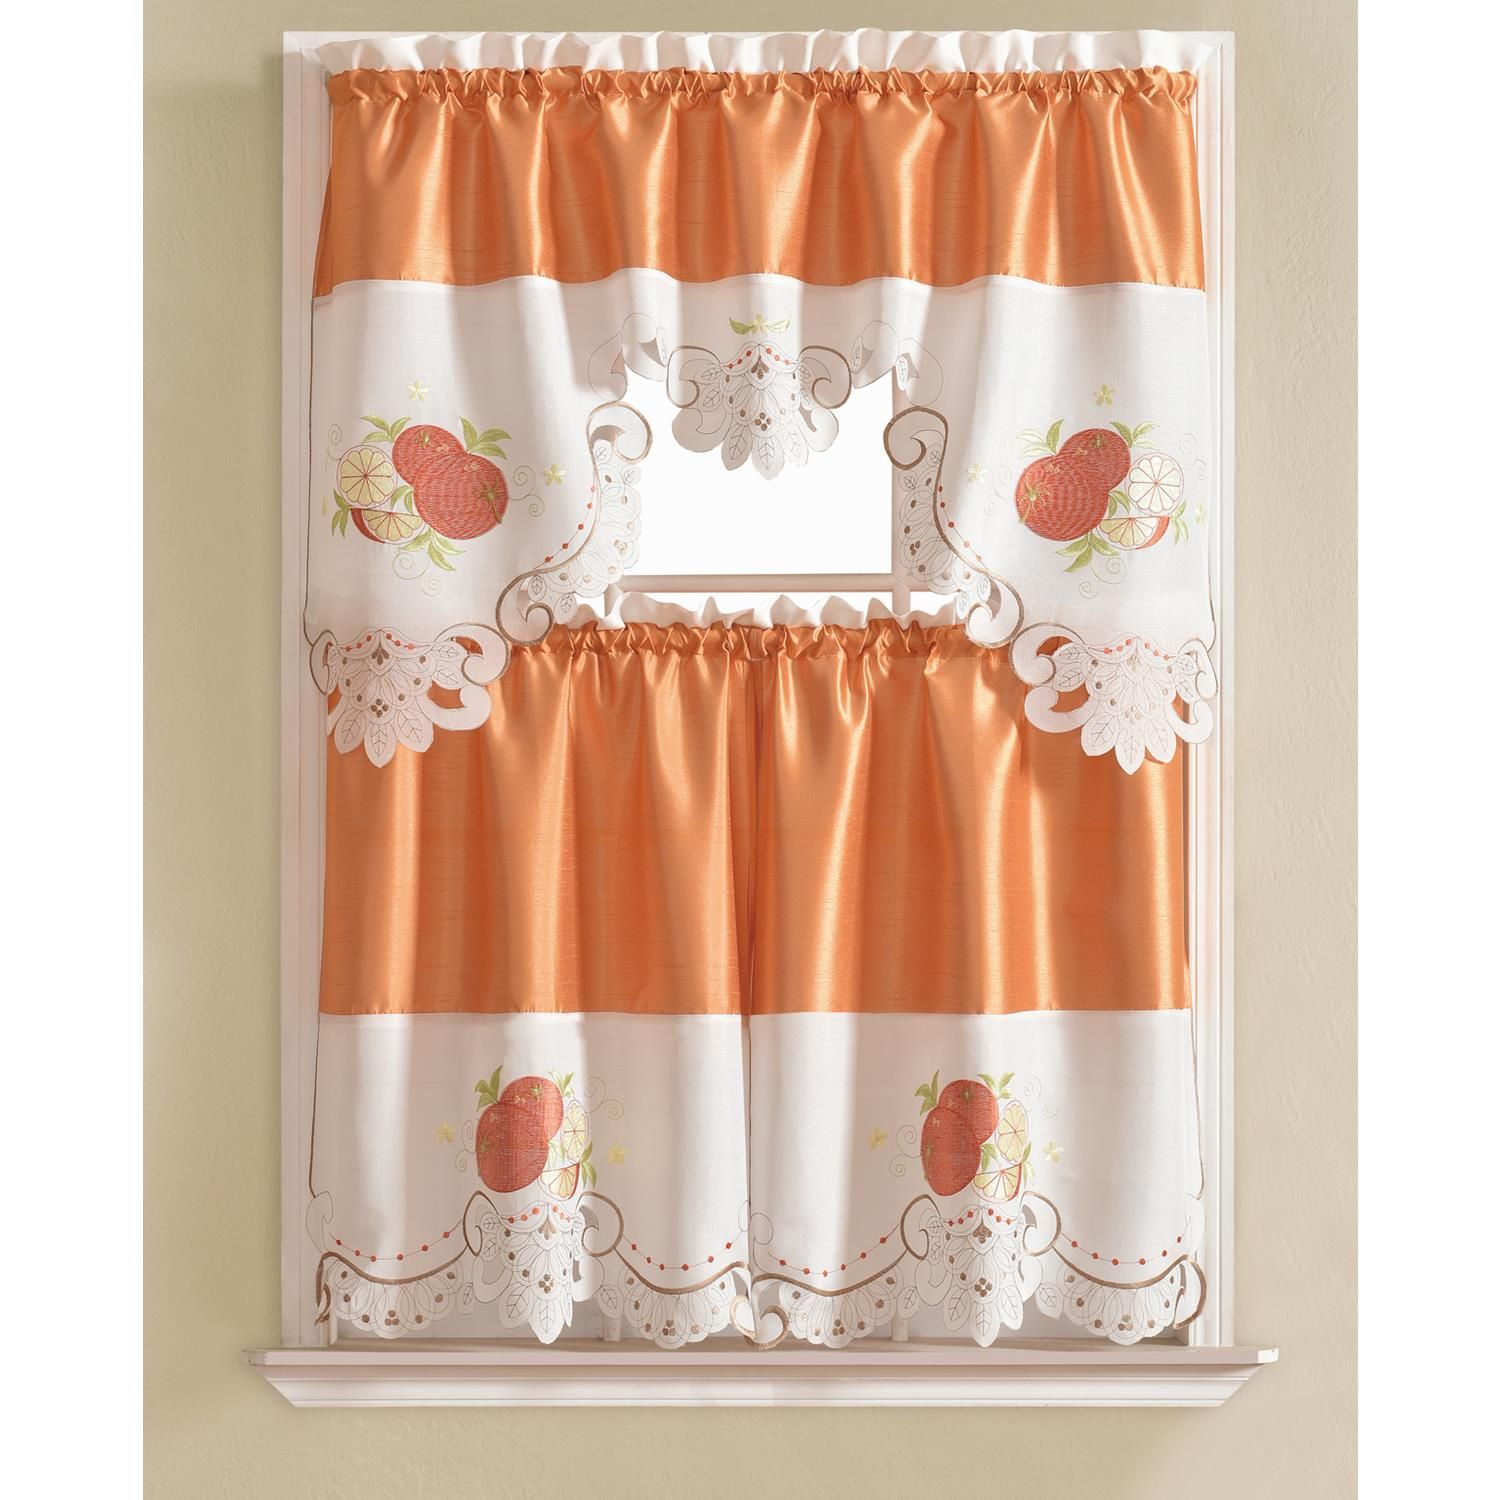 Details About Noble Embroidered Orange Tier And Valance Kitchen Curtain Set In Lodge Plaid 3 Piece Kitchen Curtain Tier And Valance Sets (View 19 of 20)